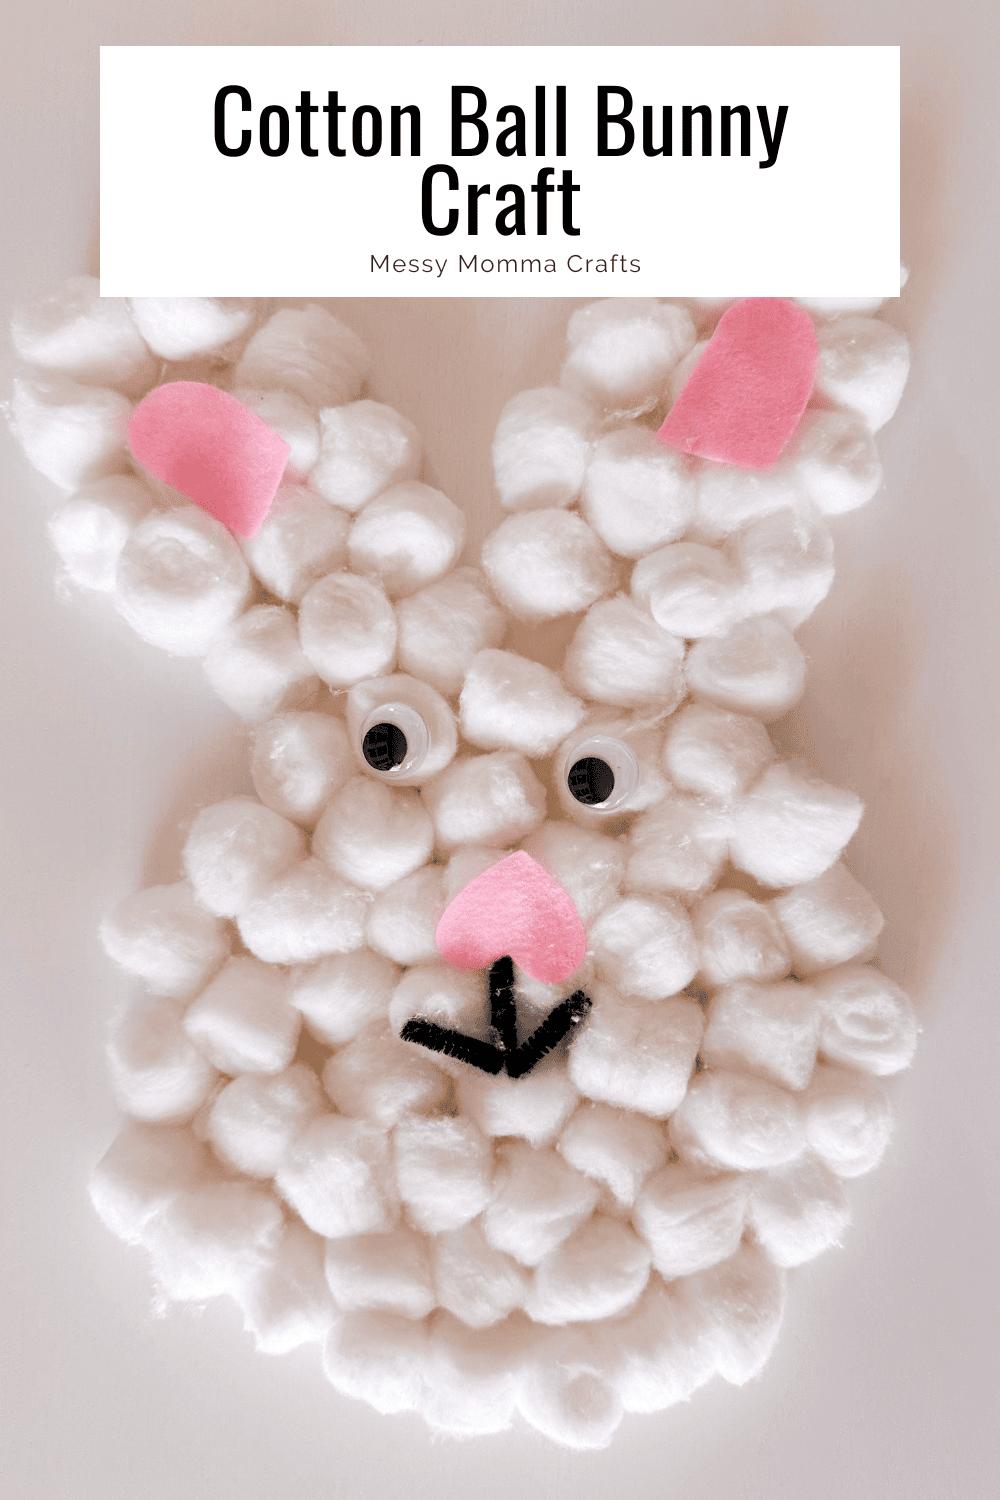 Cotton ball bunny face with pink ears, googly eyes, and a black mouth.